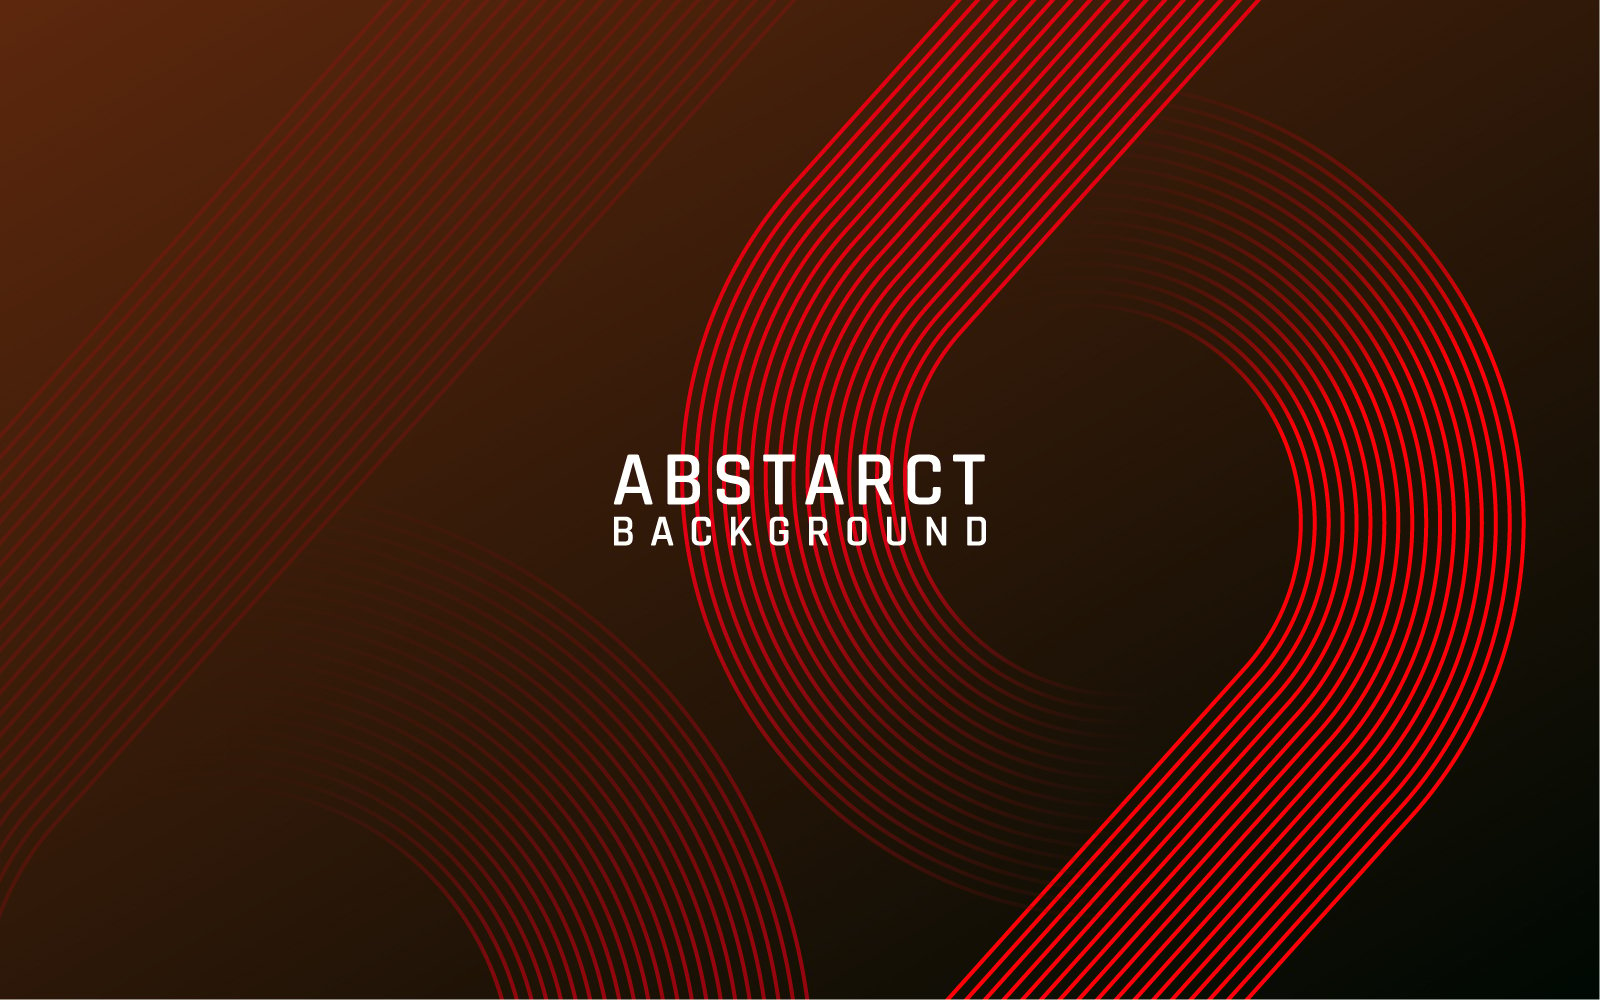 Kit Graphique #390459 Abstract Background Divers Modles Web - Logo template Preview